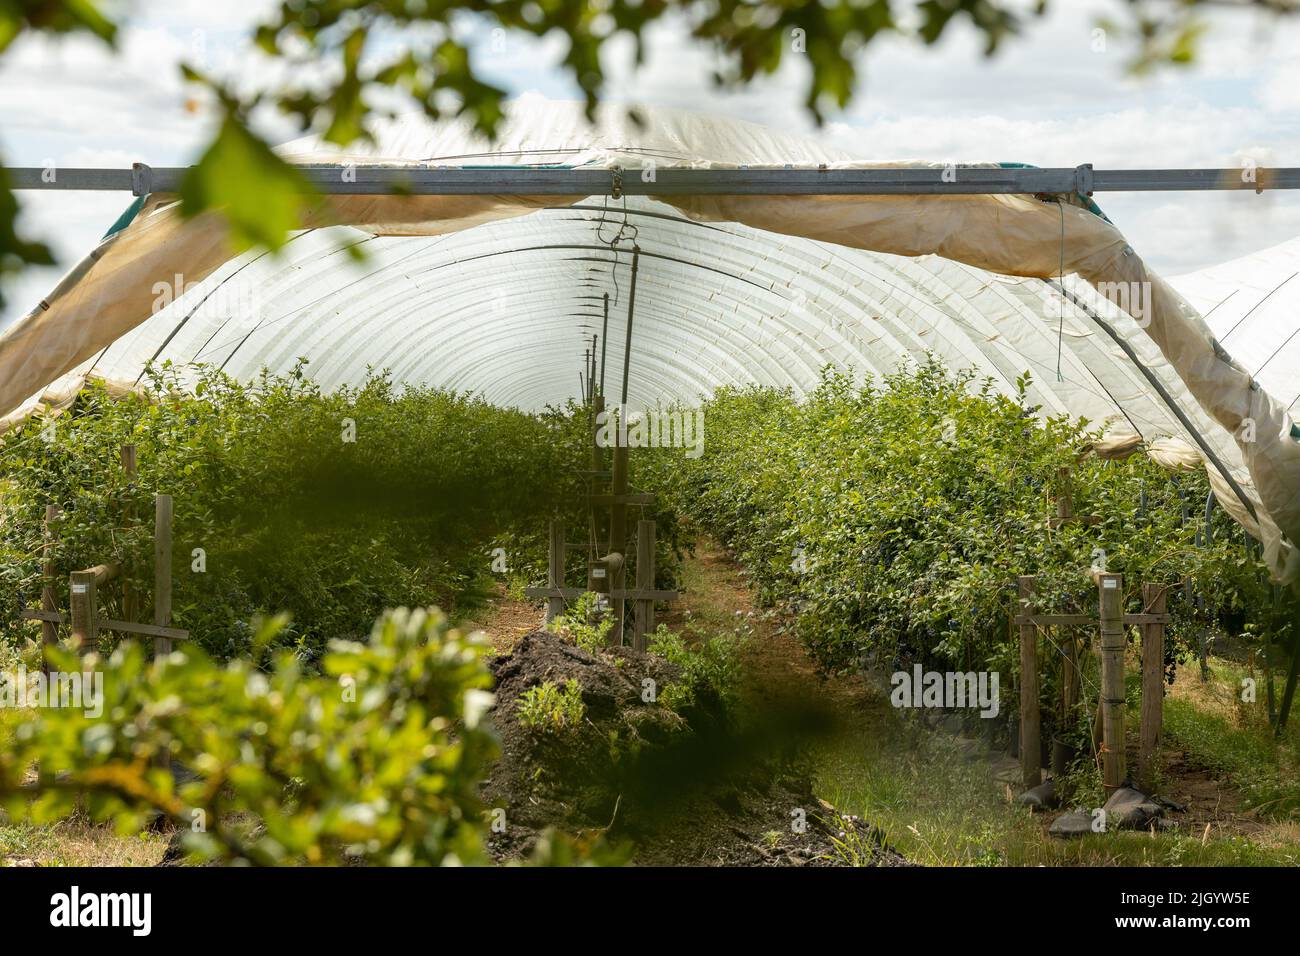 Polytunnels in horticulture Stock Photo